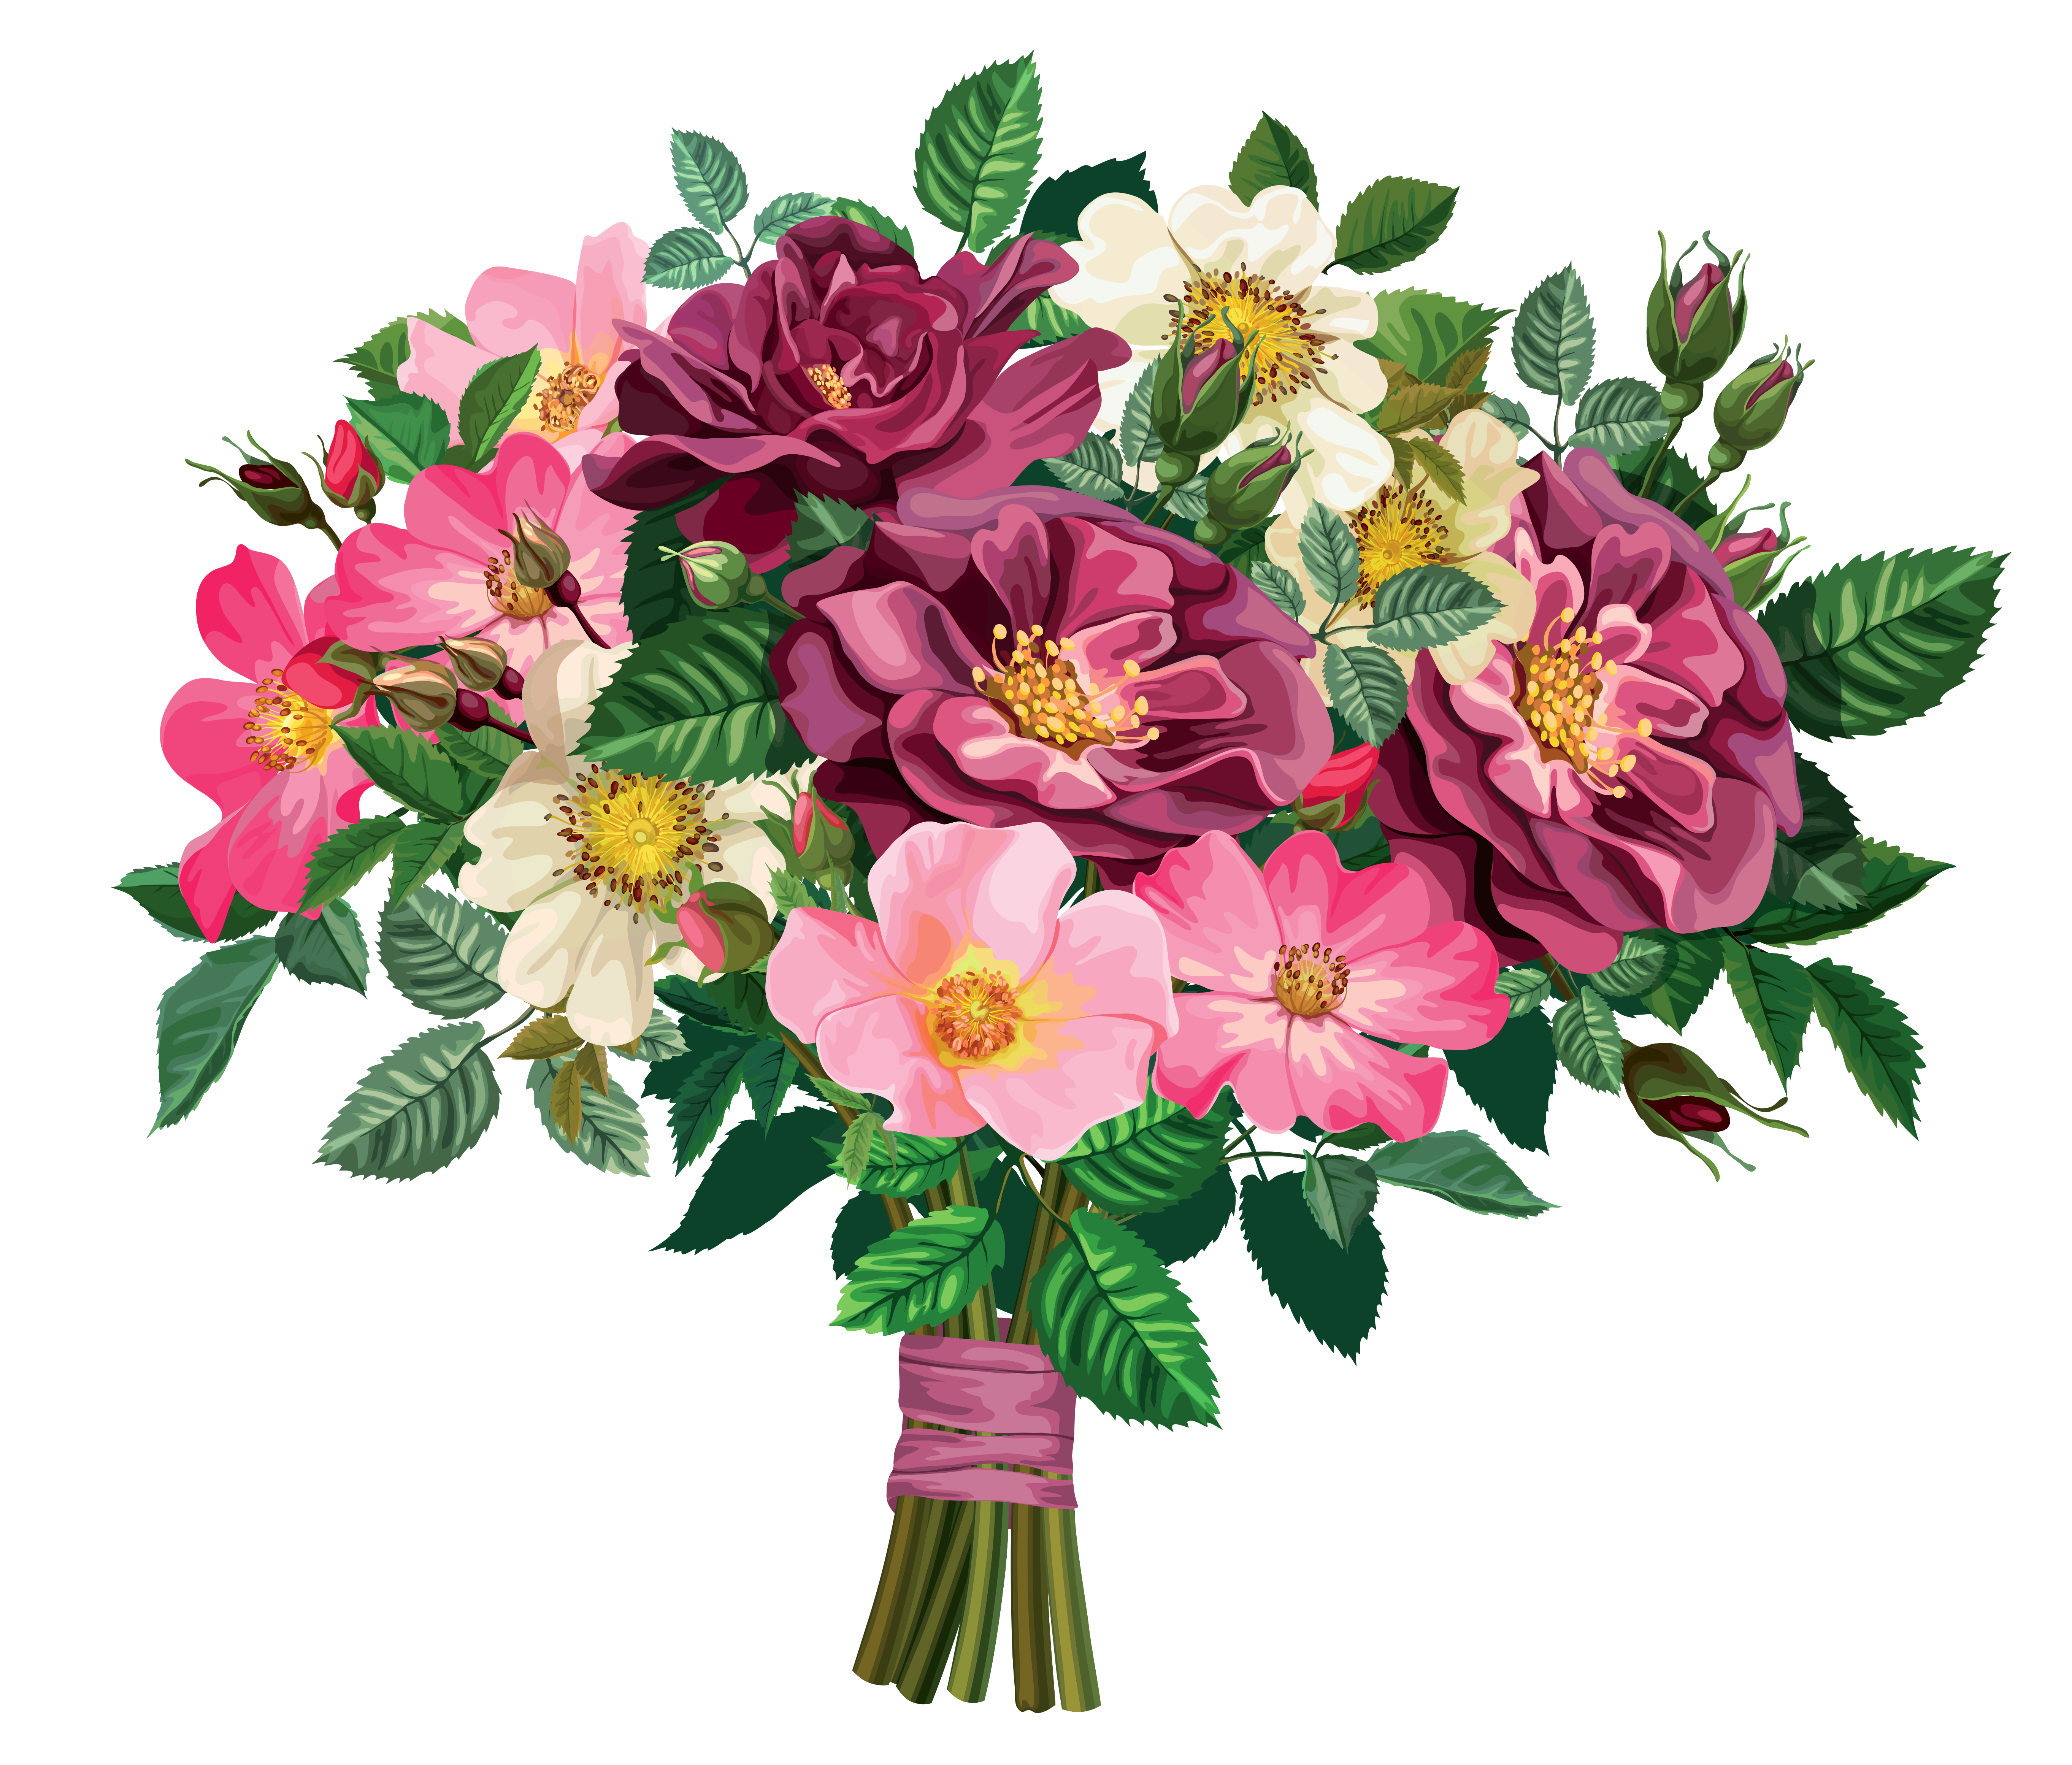 Bunch of flowers clipart 20 free Cliparts | Download ...